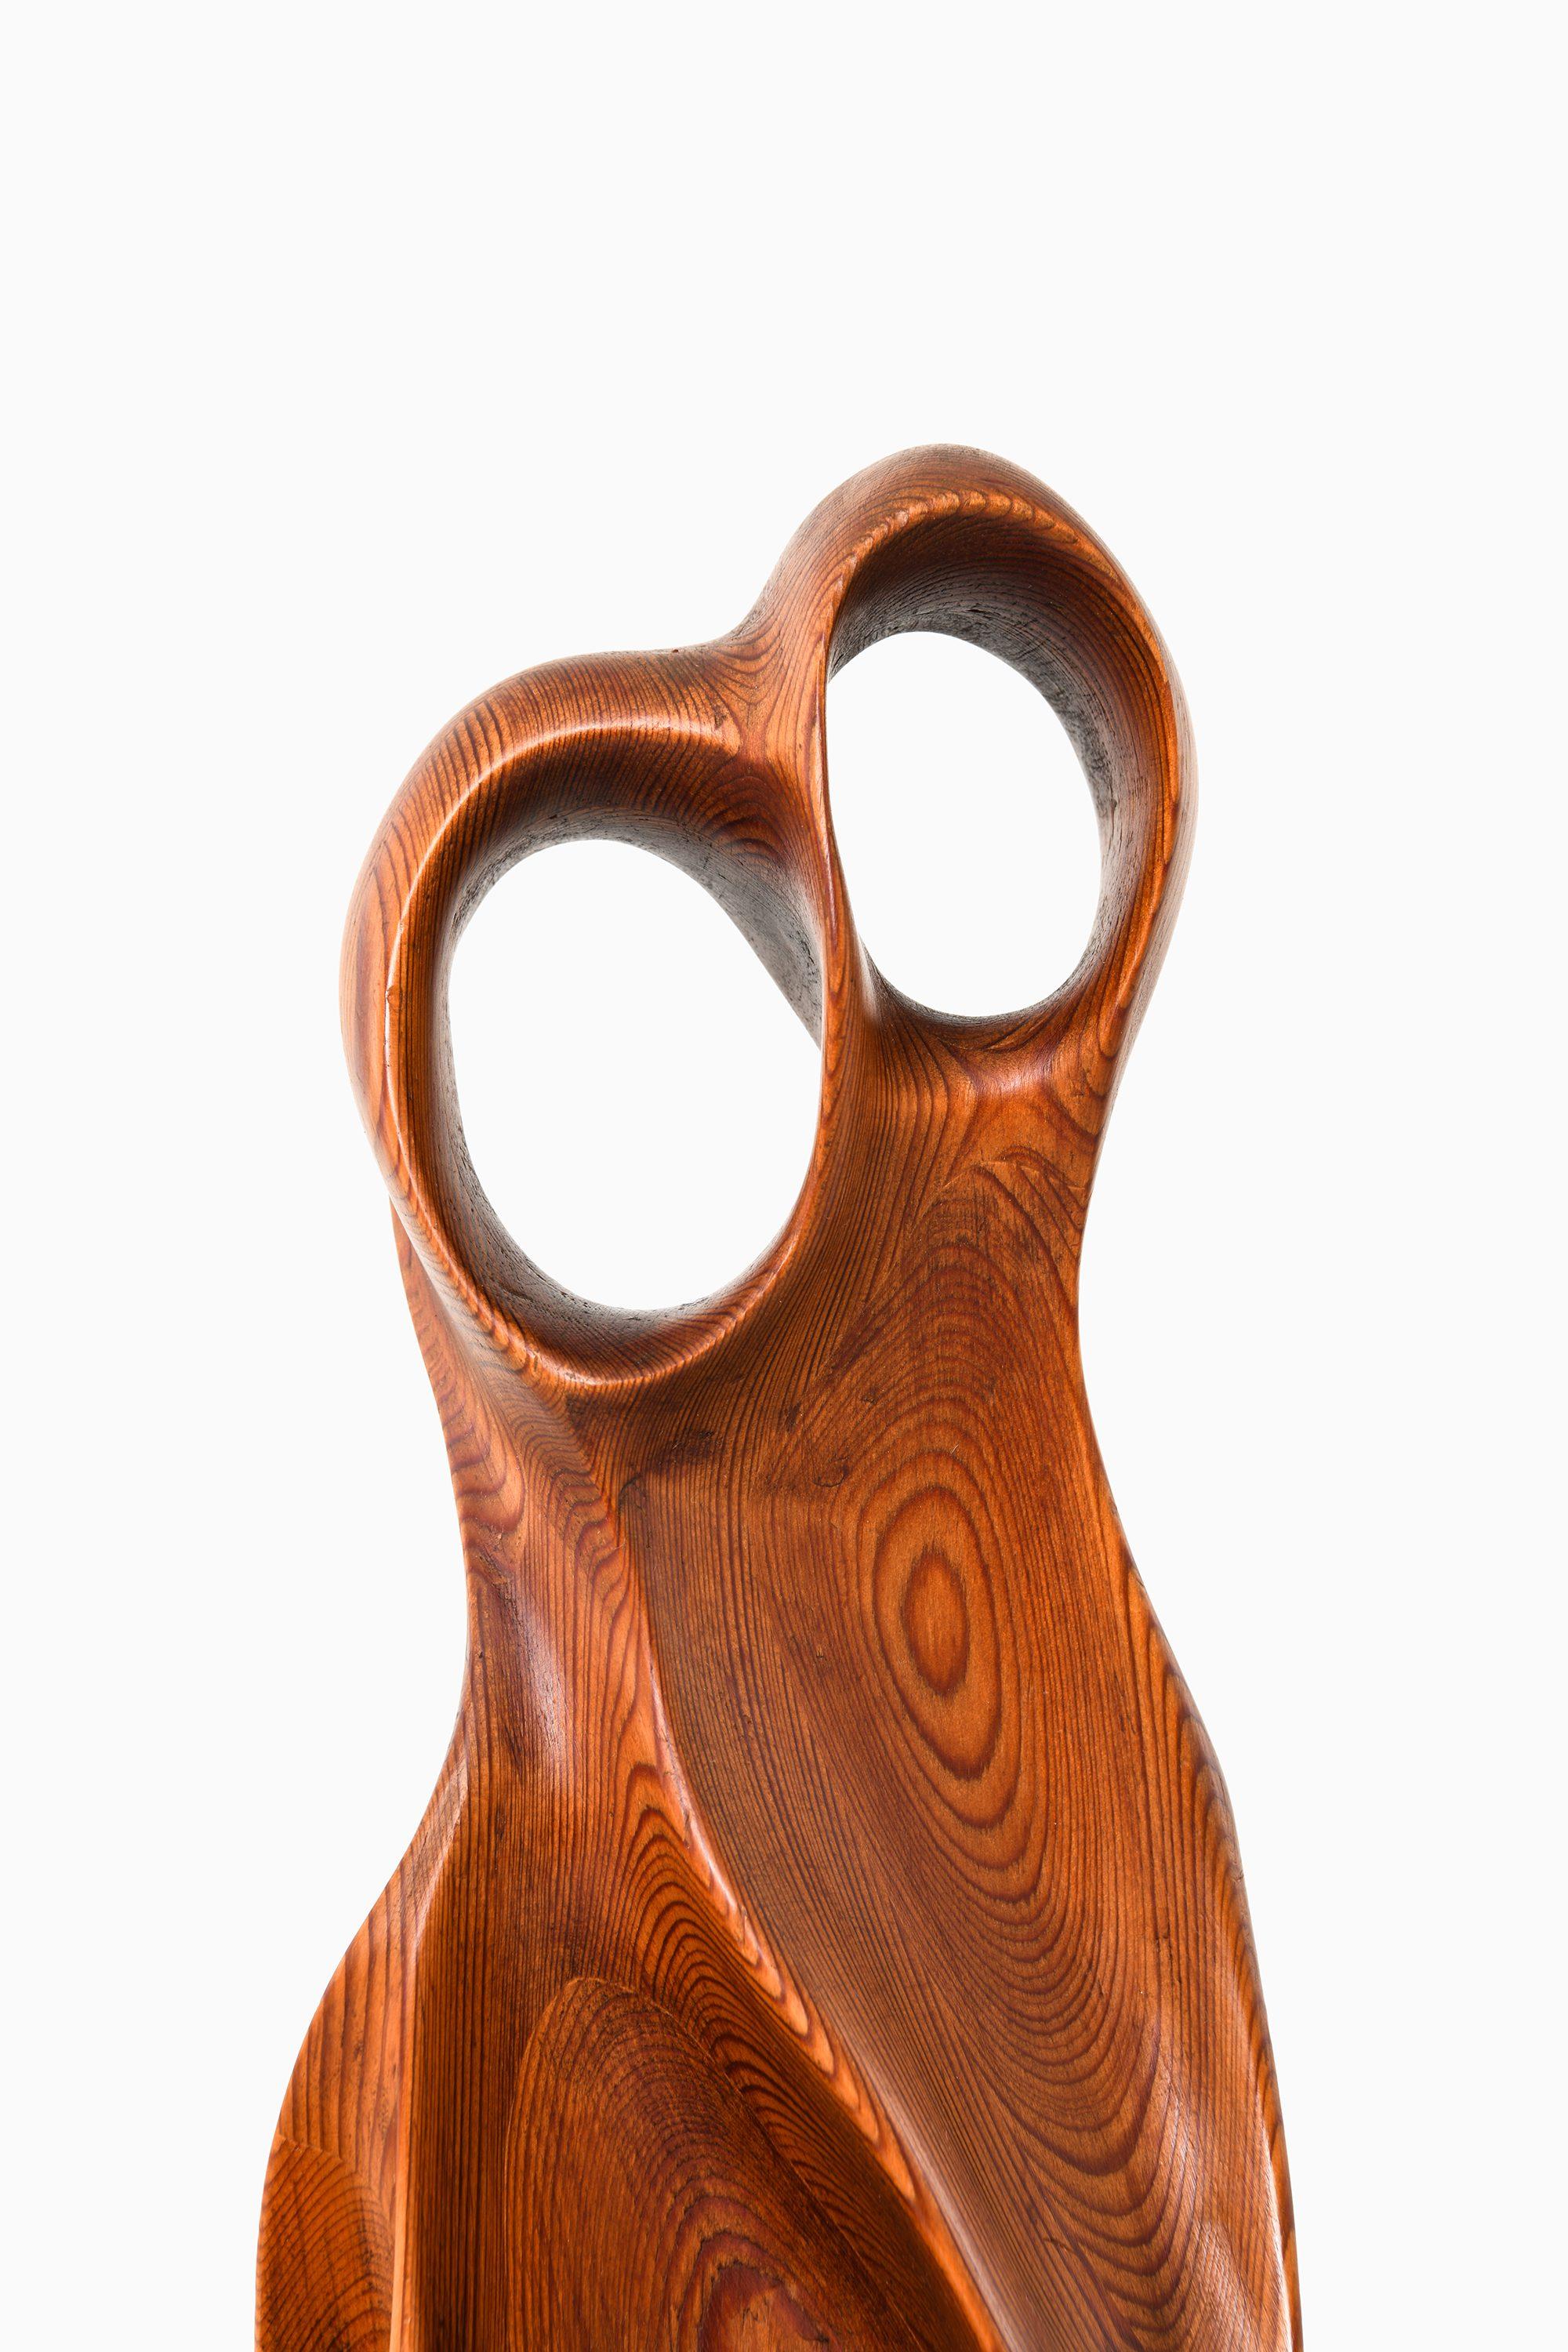 Rare Sculpture in Pine by Johnny Mattsson, 1950's

Additional Information:
Material: Pine
Style: Mid century, Scandinavian
Produced by Johnny Mattsson in Sweden
Dimensions (W x D x H): 18 x 12 x 32 cm
Condition: Good vintage condition, with minor